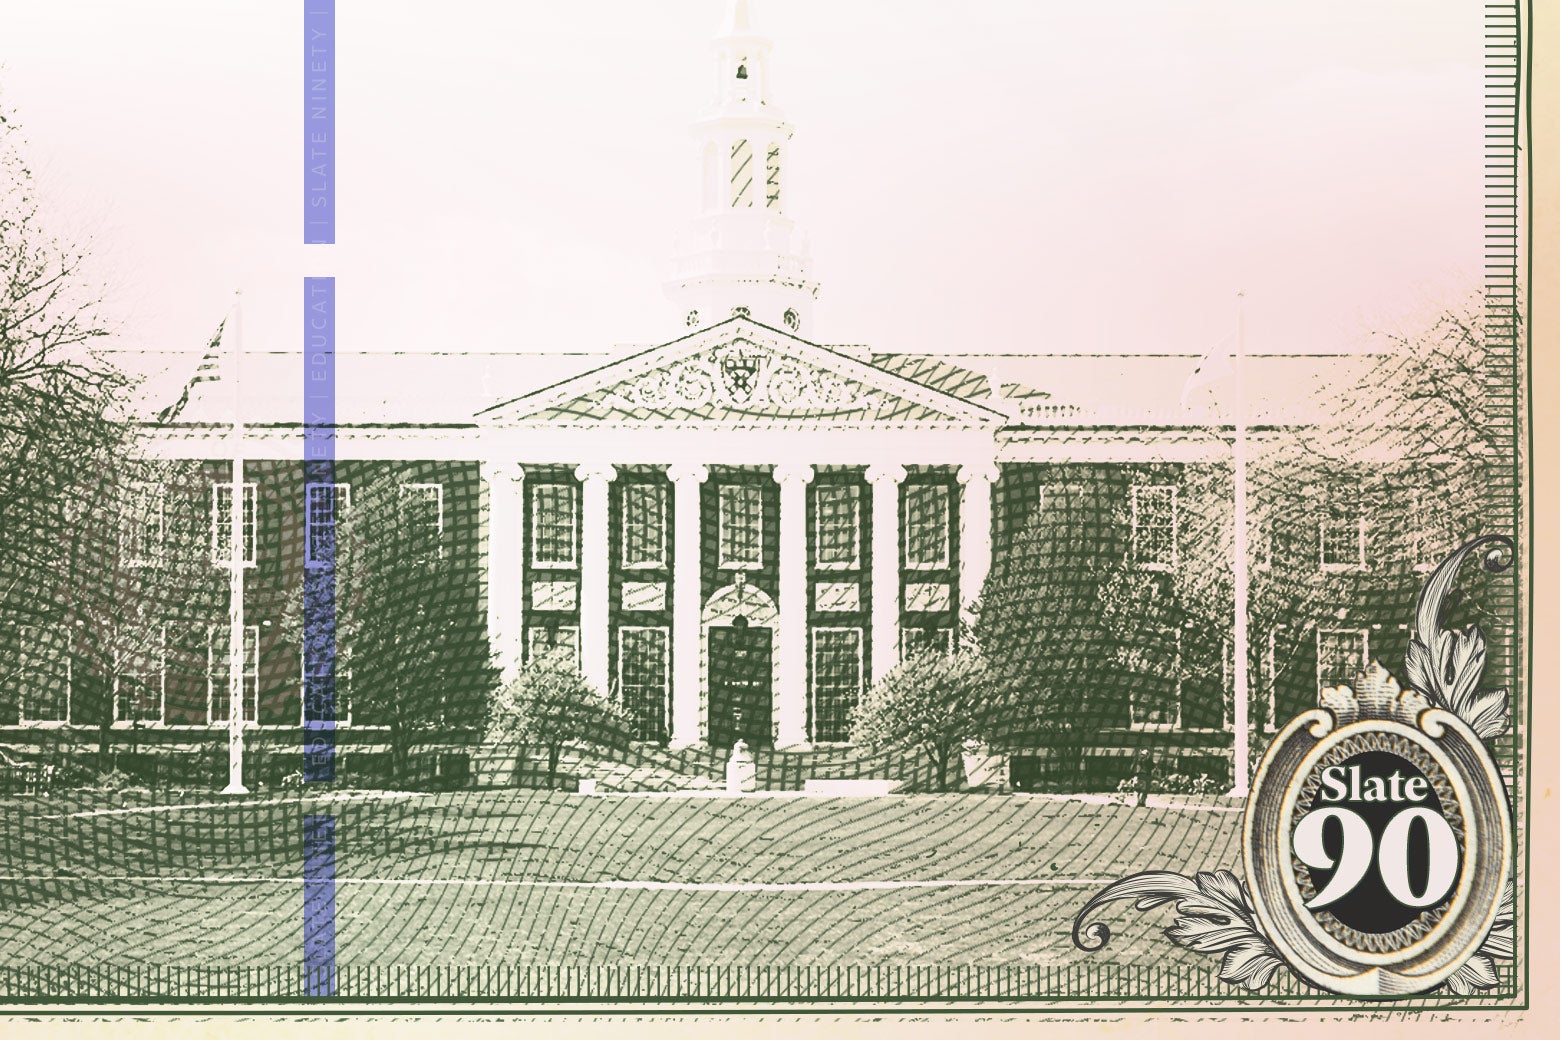 Paper currency showing a building at Harvard University.